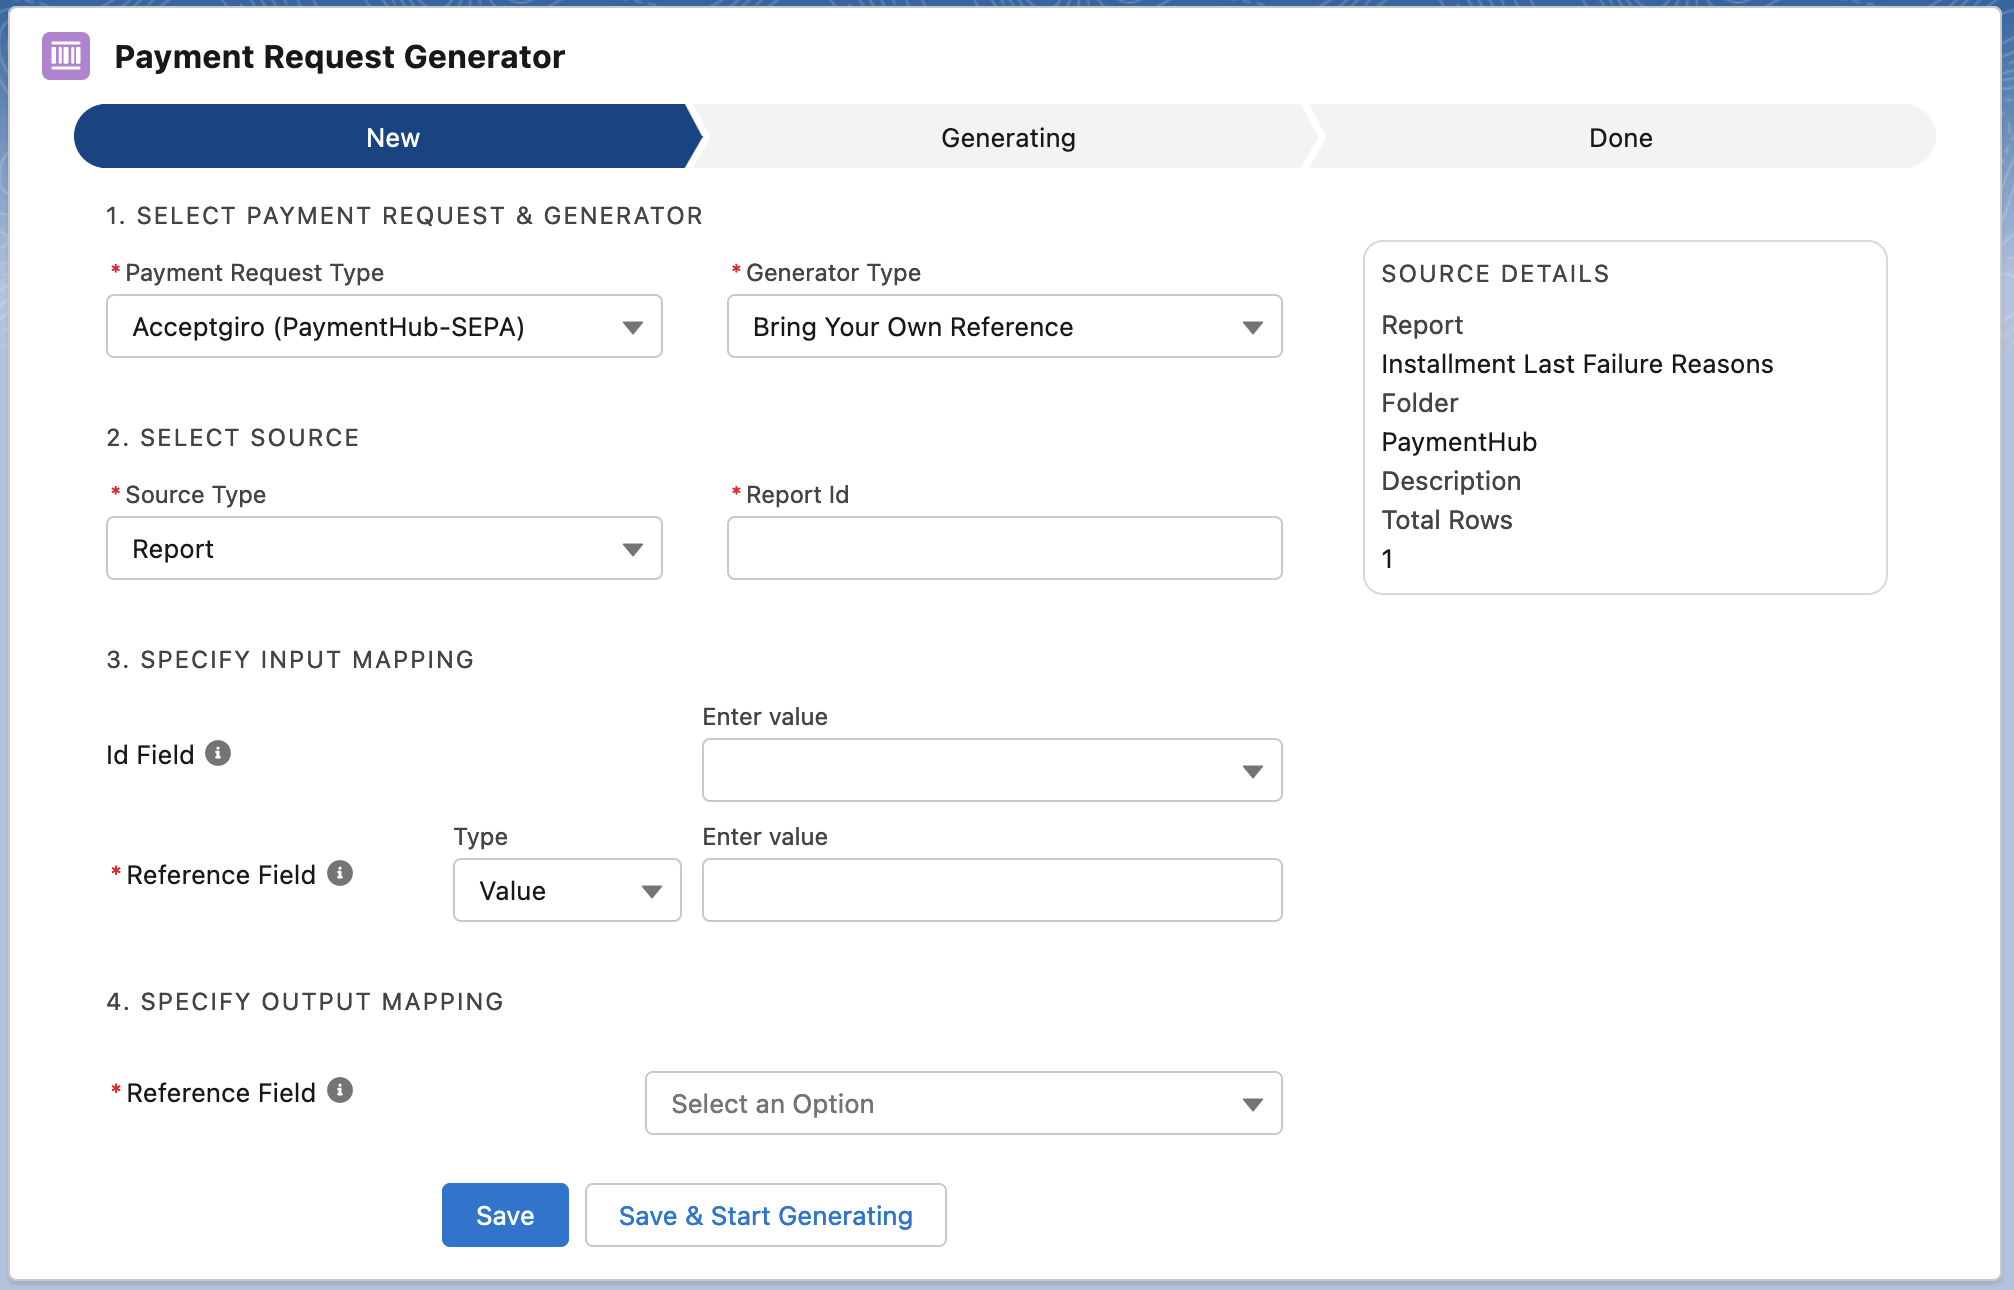 Payment Request Generator run with new static value field